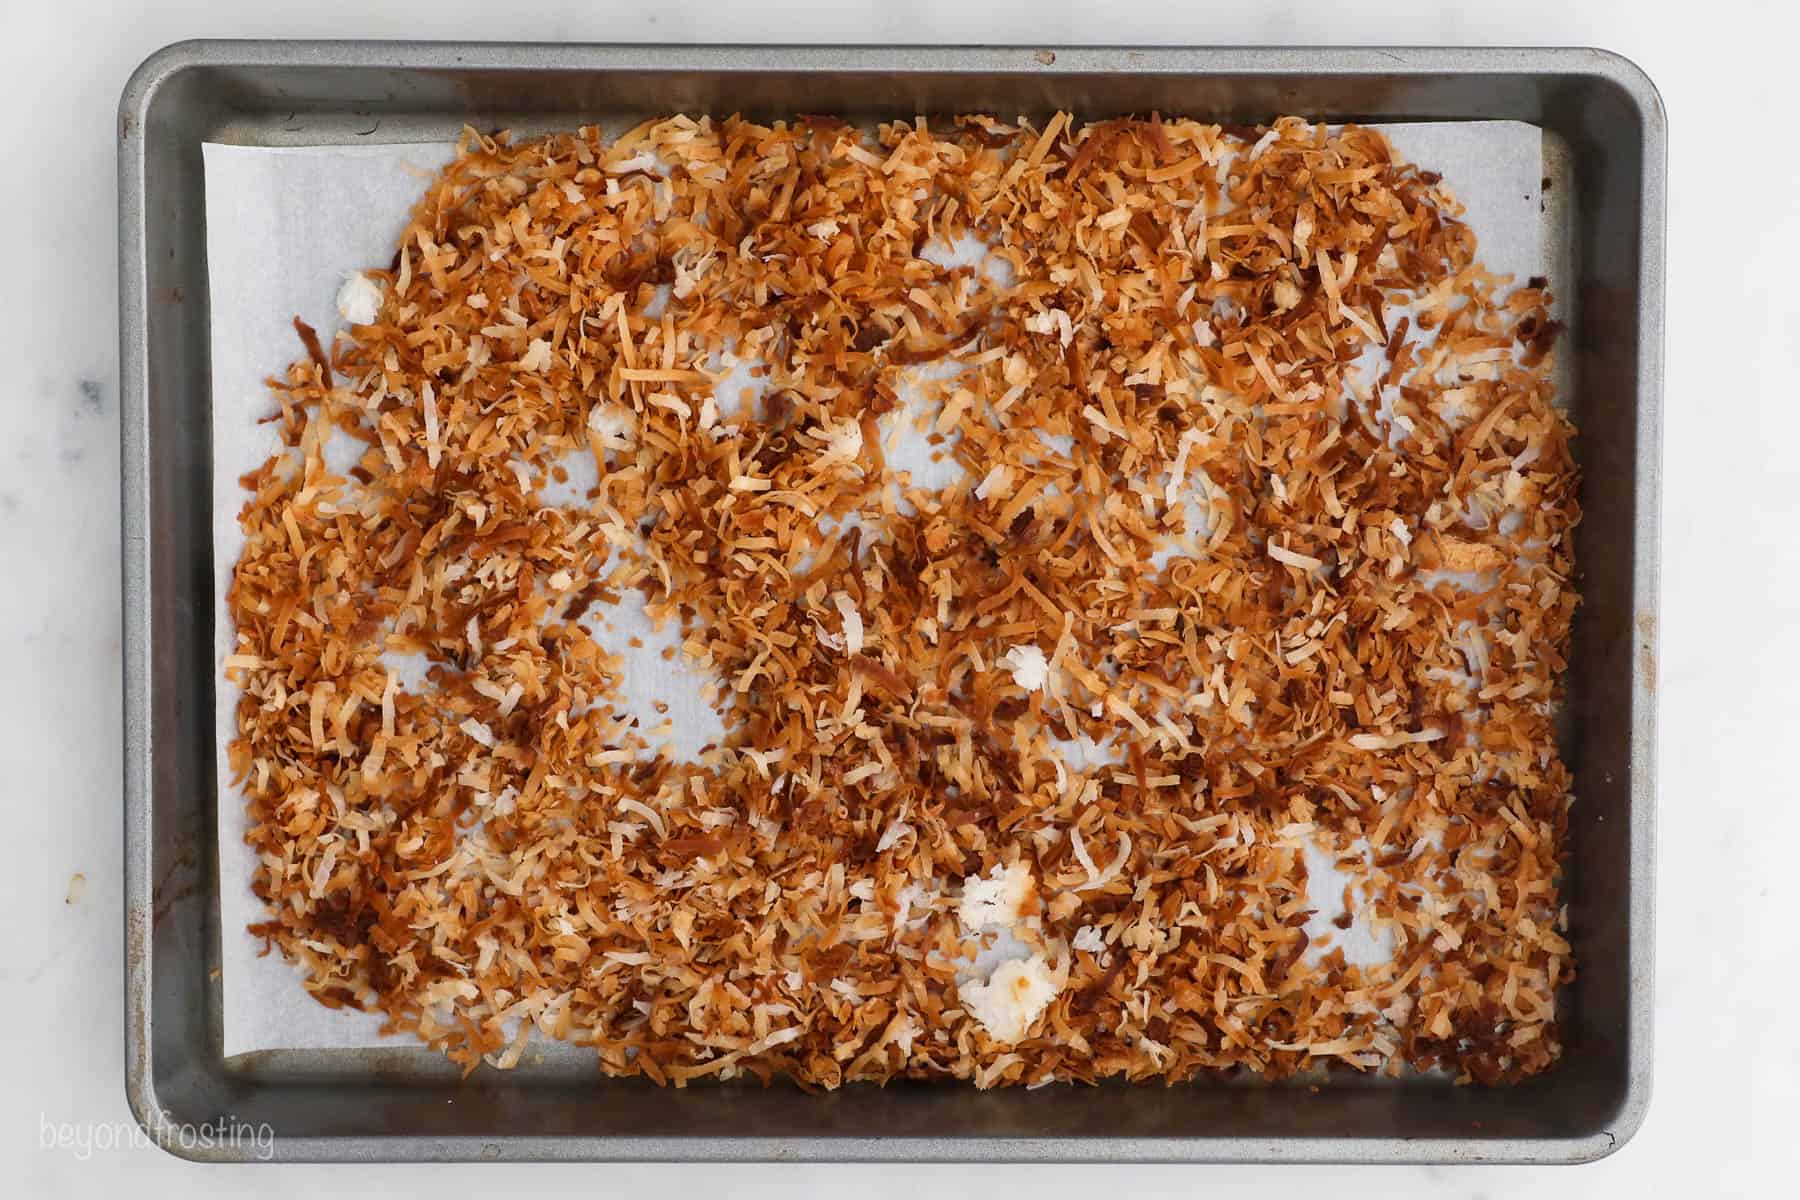 Toasted coconut spread on a baking sheet